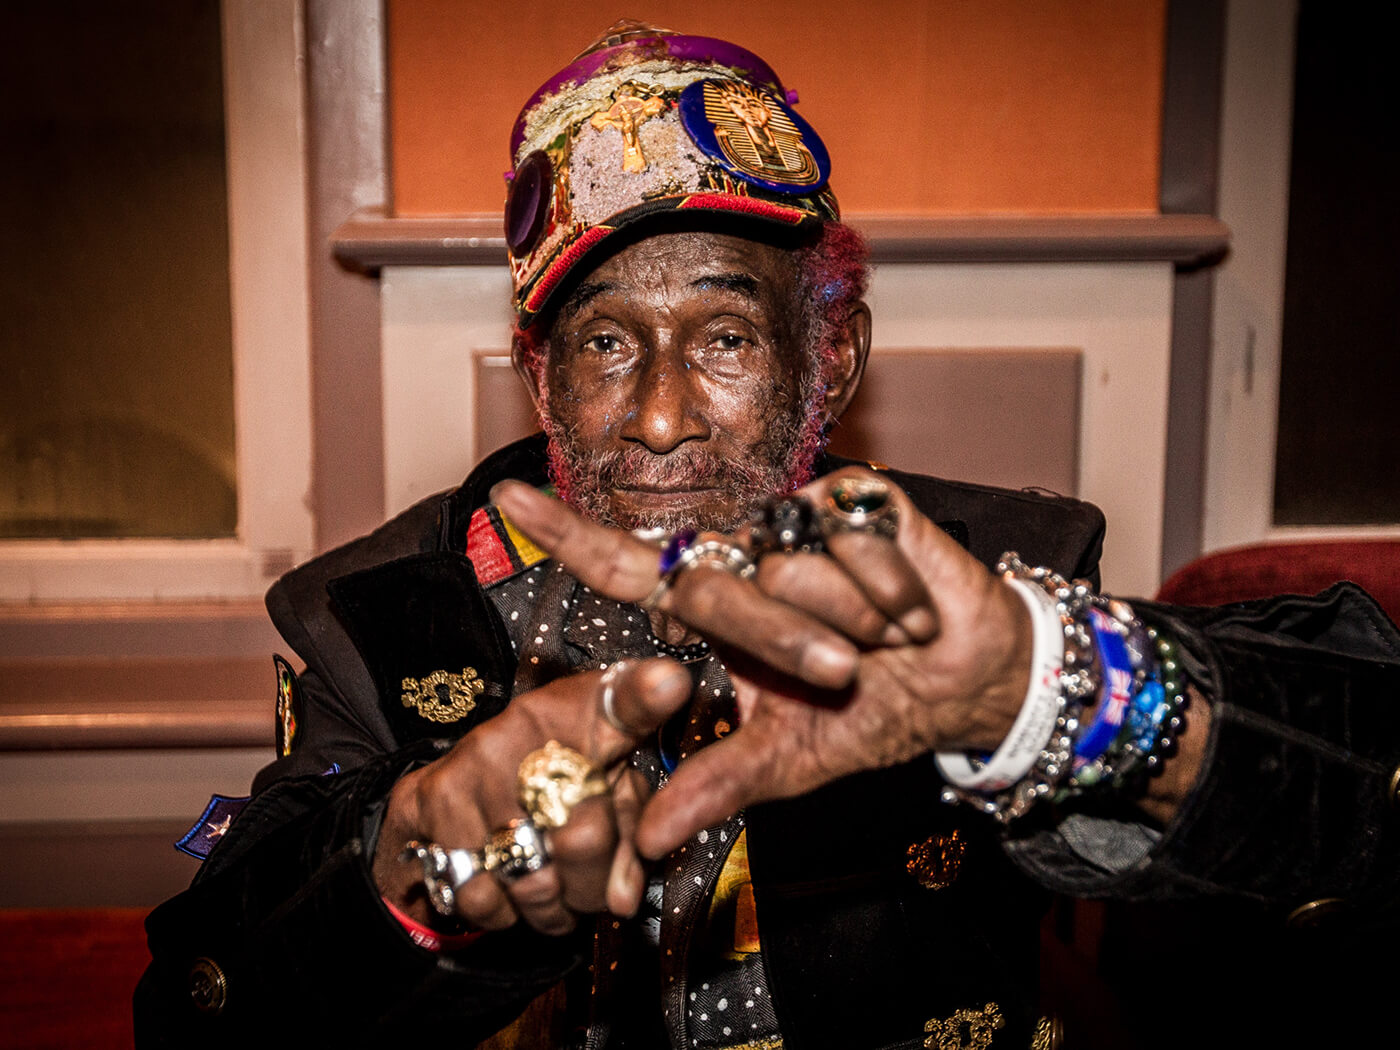 Happy Heavenly Birthday to the original Upsetter Lee Scratch Perry 